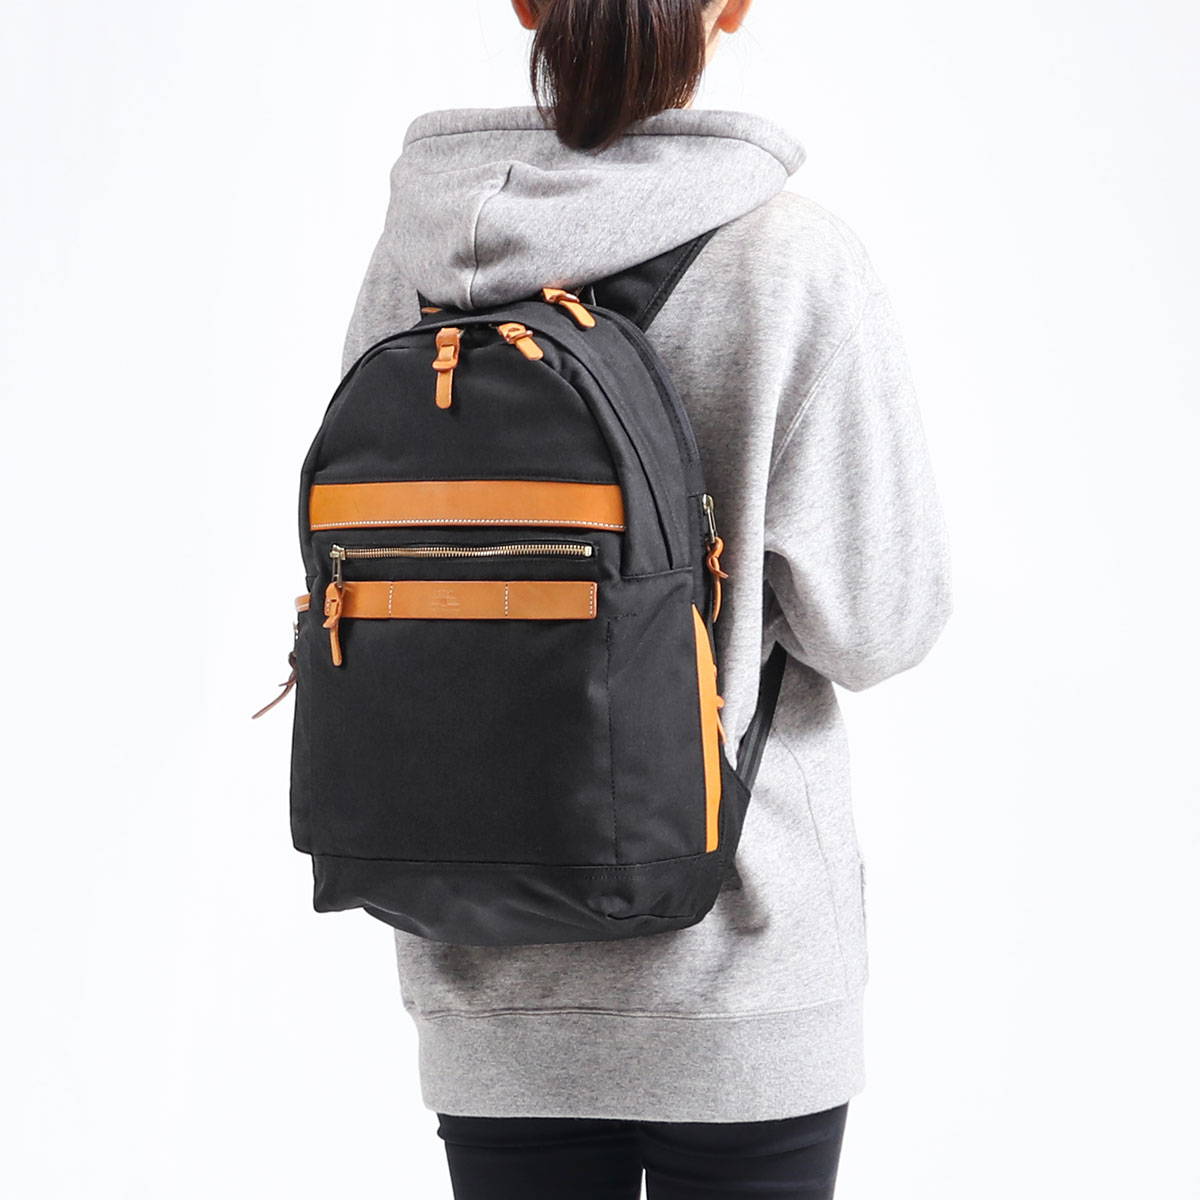 AS2OV アッソブ ATTACHMENT DAY PACK 011920｜【正規販売店】カバン 